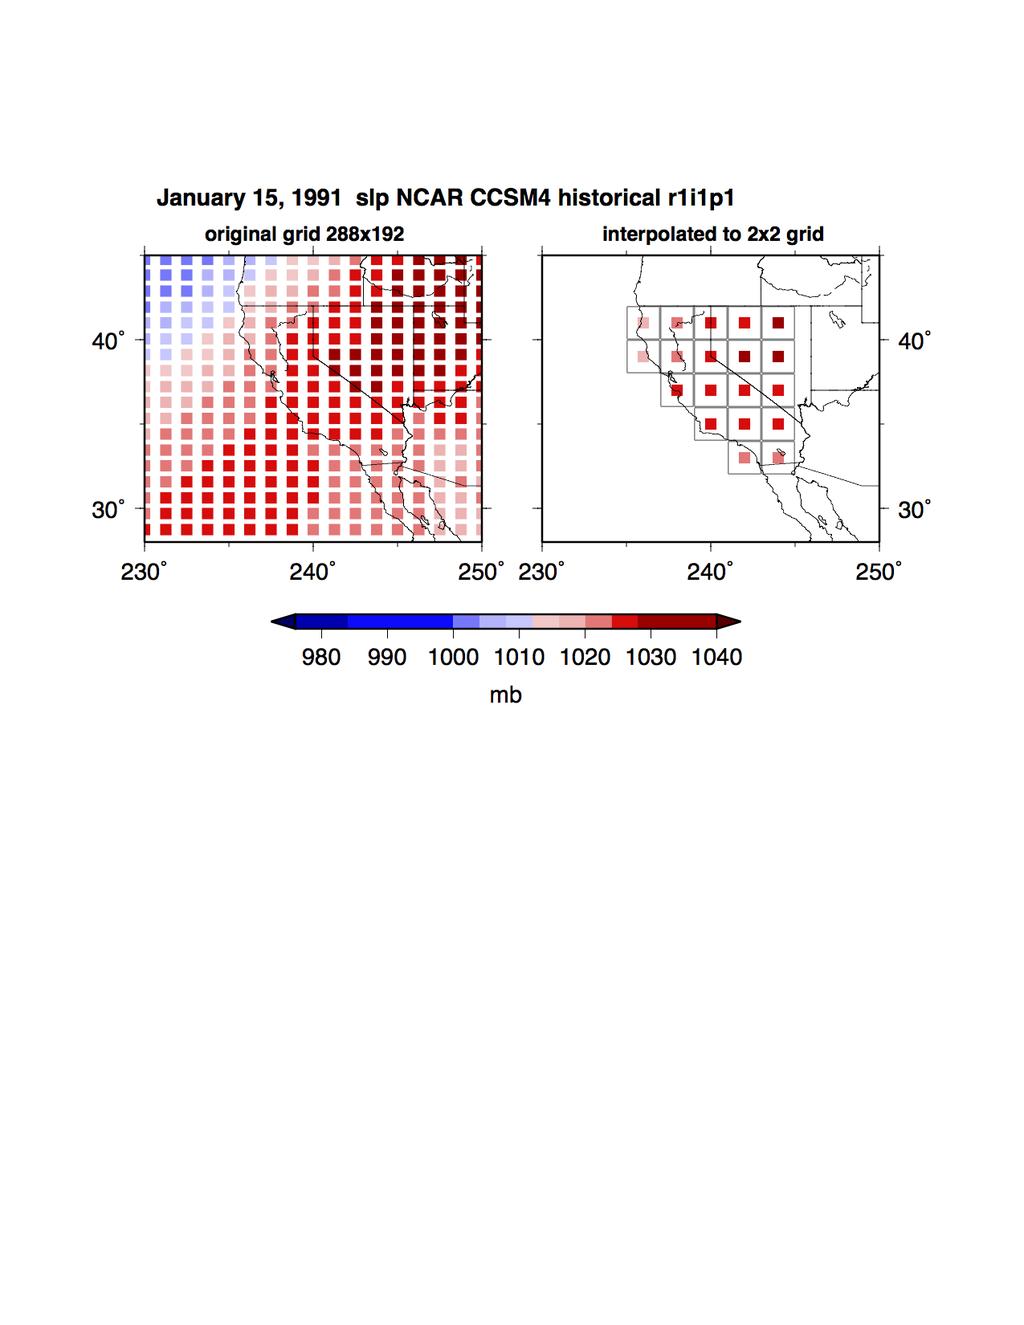 Projected change temperature and precipita4on 31 Global Climate Models RCP 8.